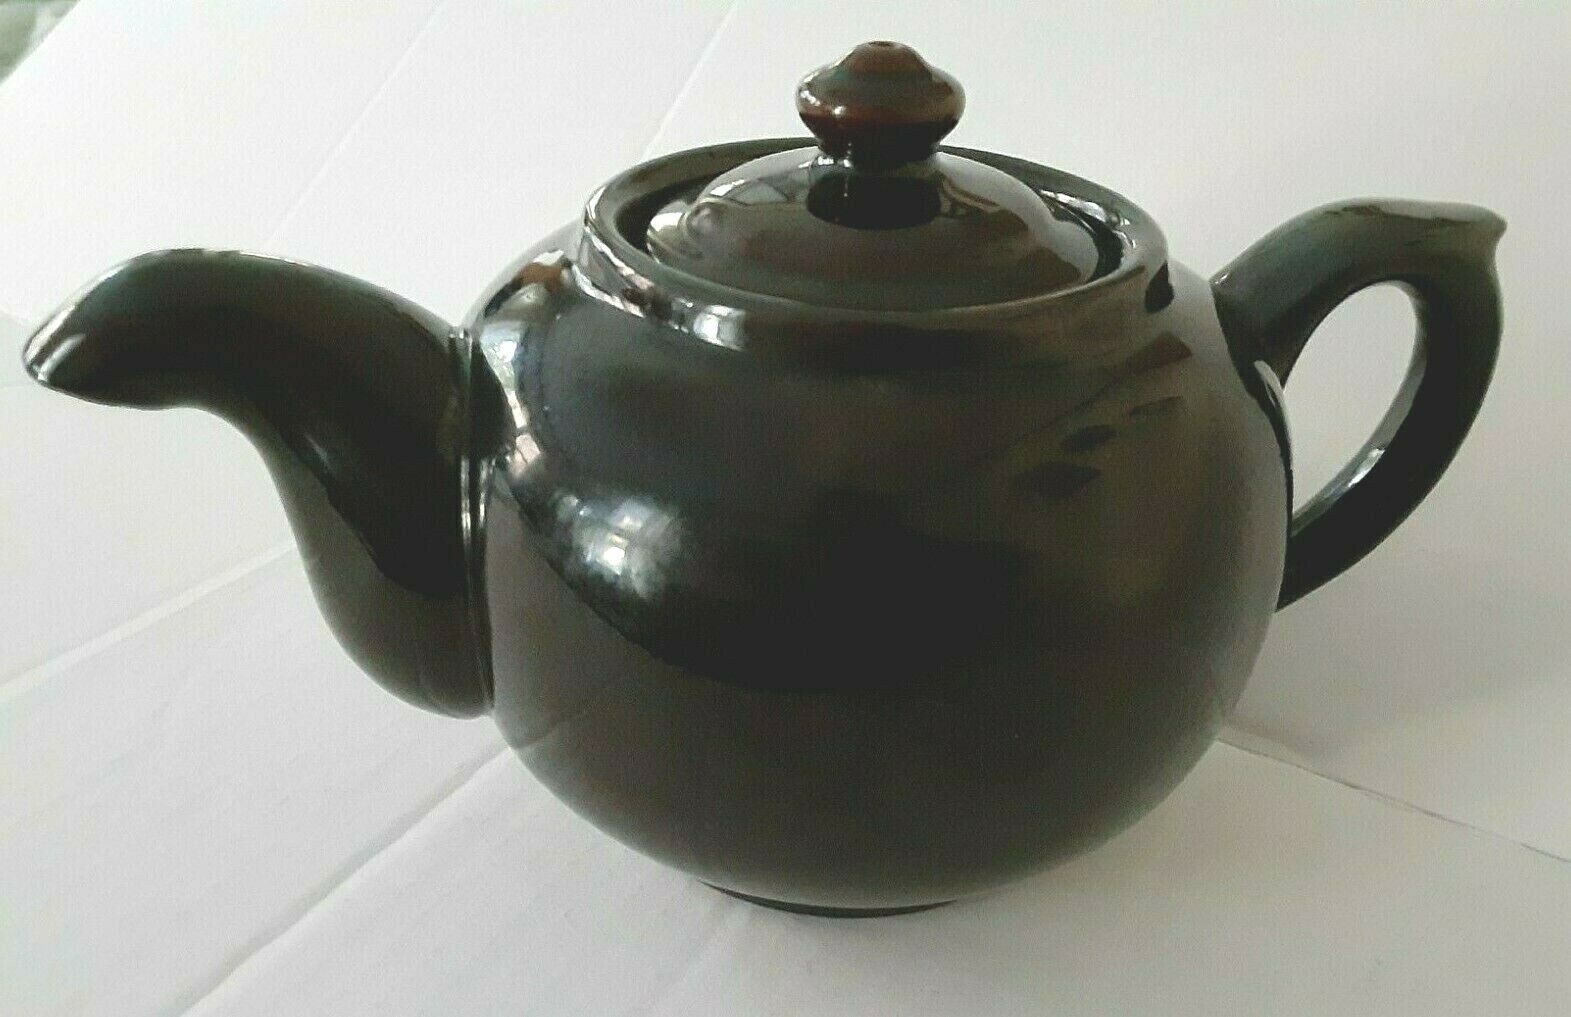 ROSKO 4-cupTeapot made in JAPAN Brown Redware Asian Vtg. Collectible Japanese